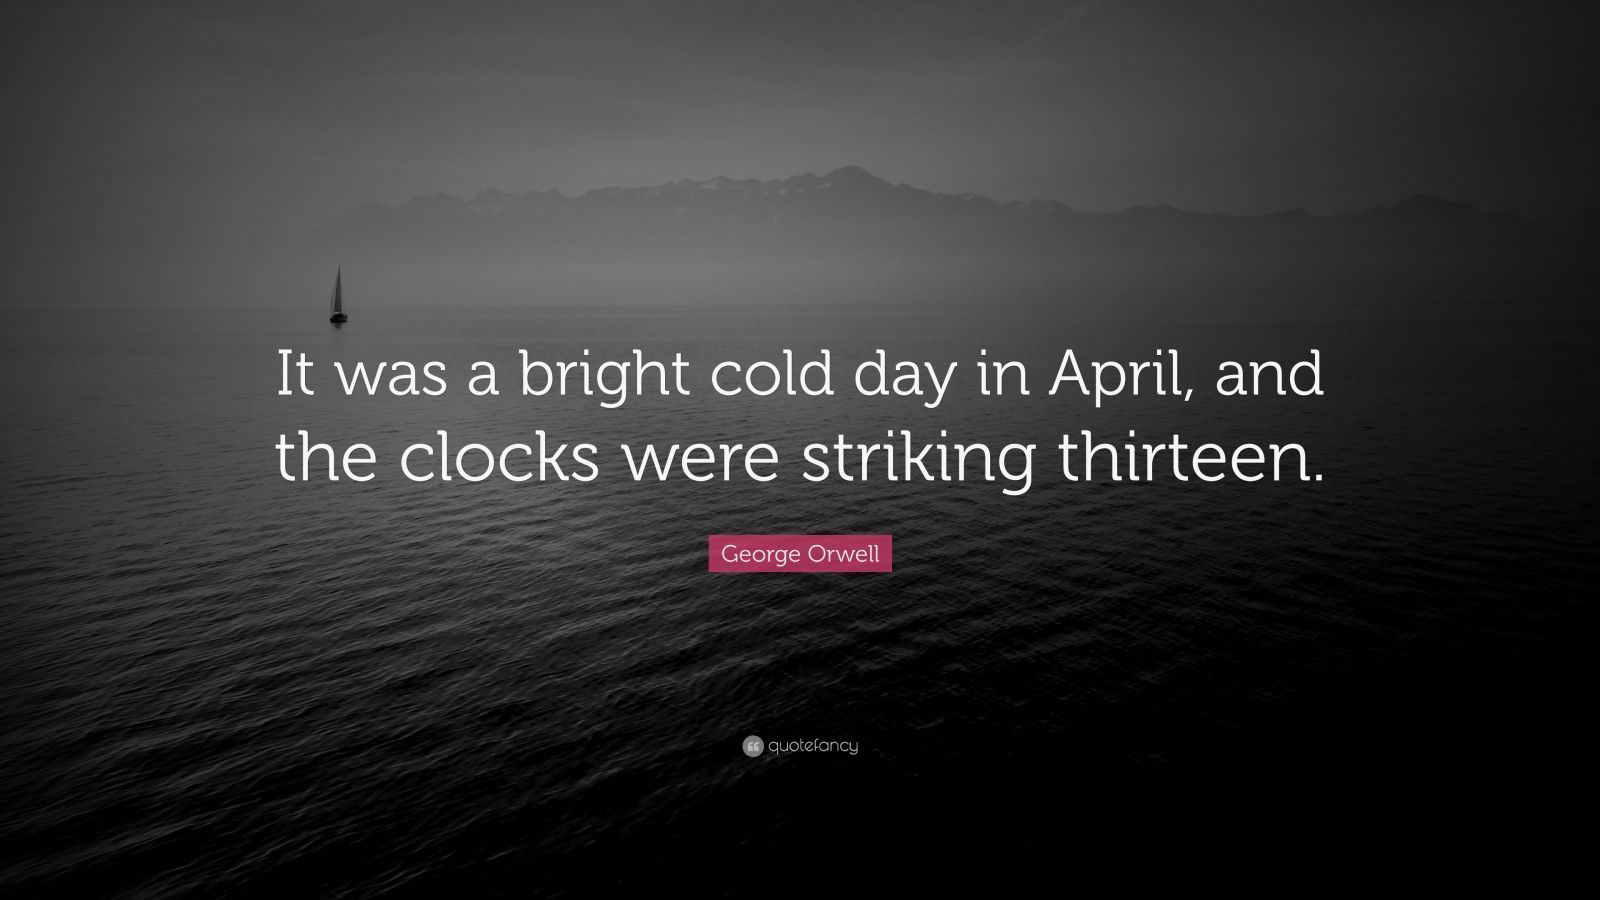 George Orwell Quote: “It was a bright cold day in April, and the clocks